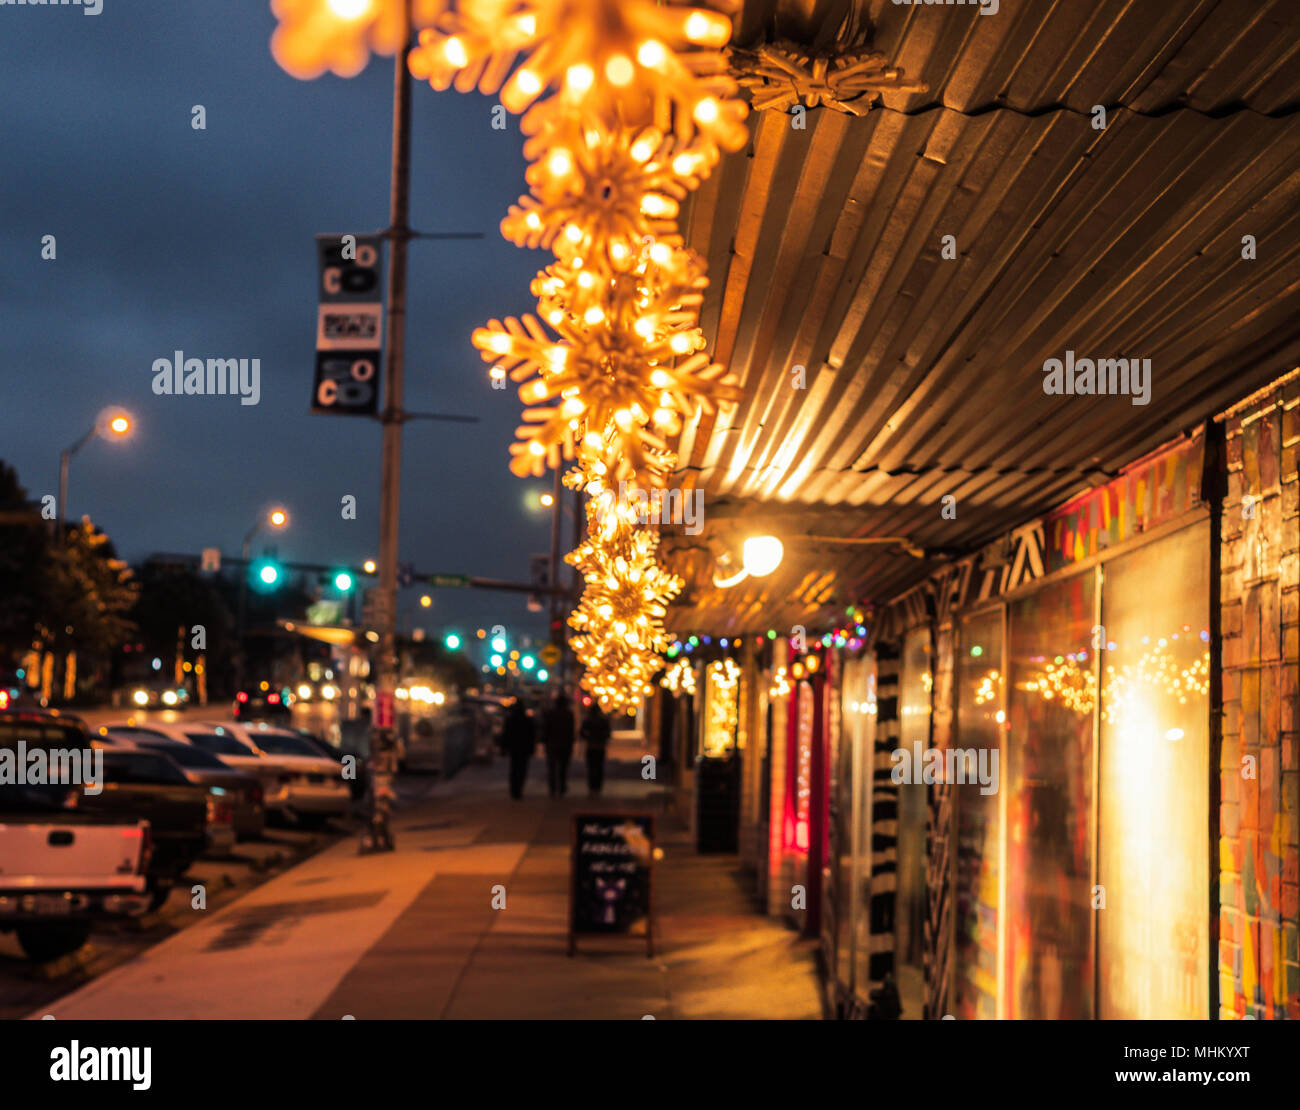 AUSTIN, TEXAS - DECEMBER 31, 2017: Holiday snowflake decorations light up a building along Congress Ave. Stock Photo